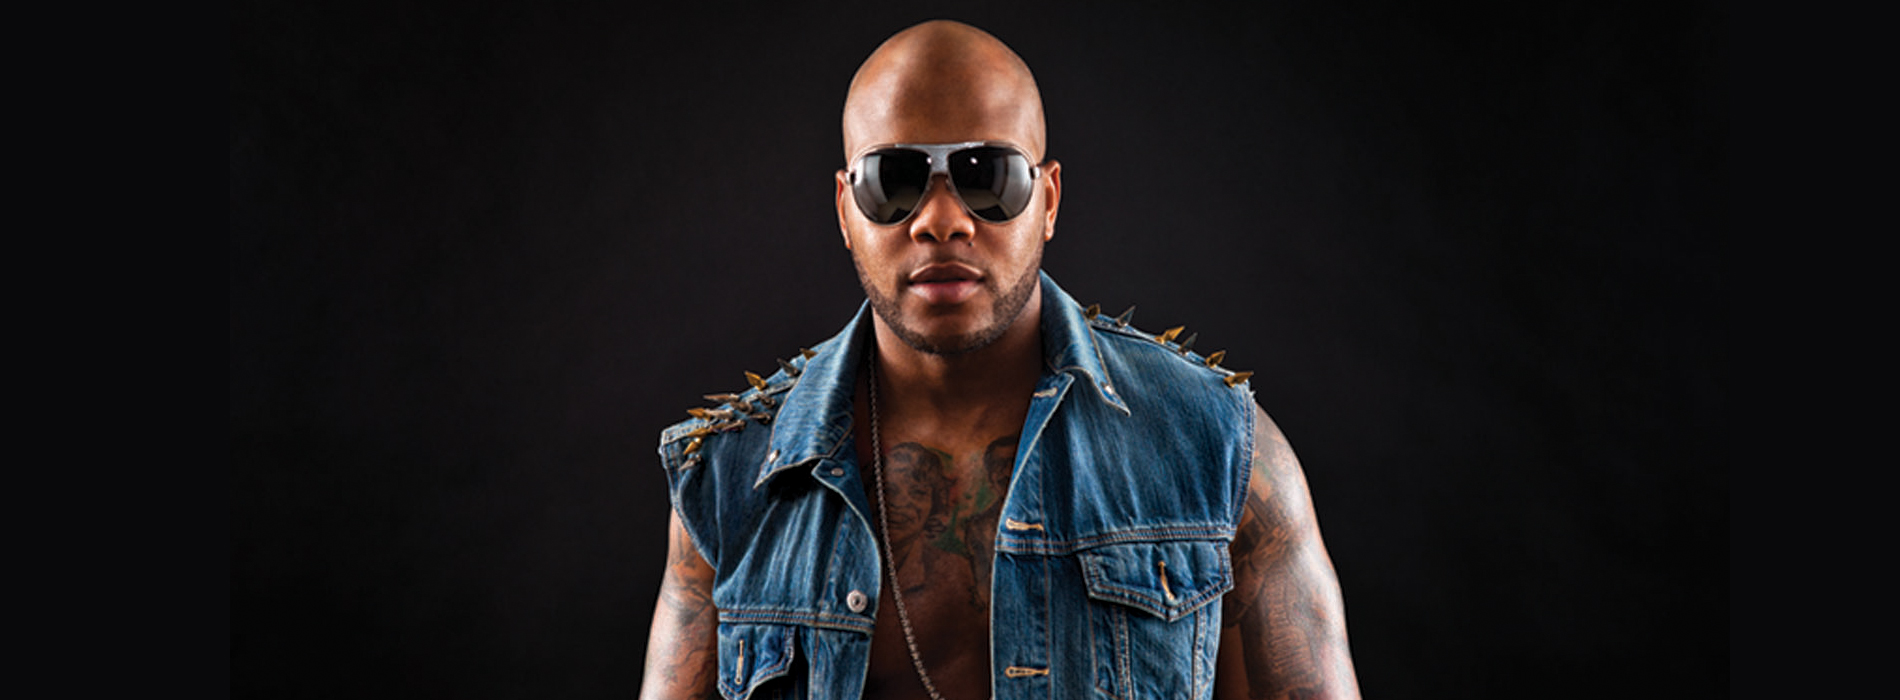 Nice Images Collection: Flo Rida Desktop Wallpapers